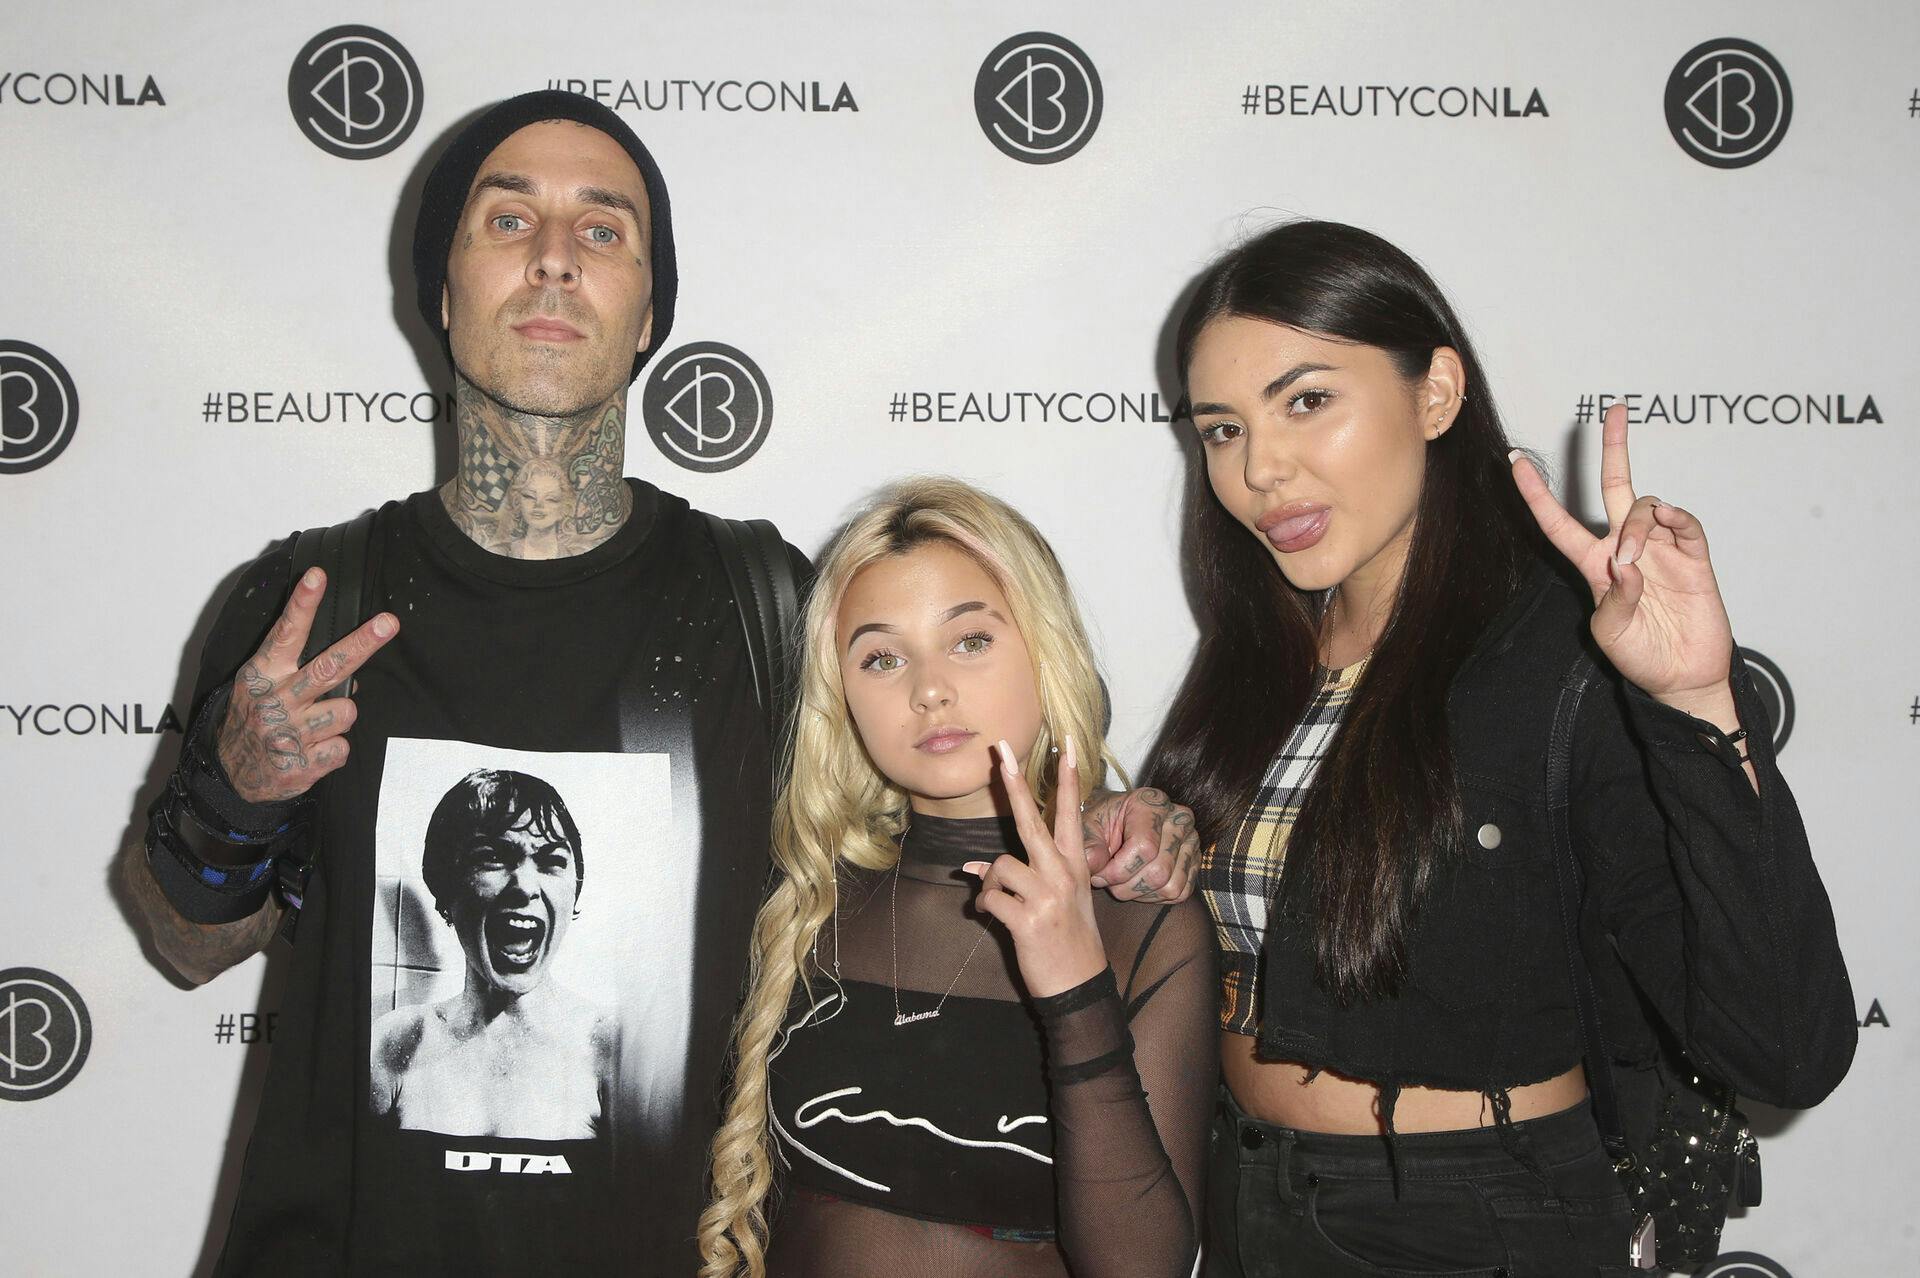 LOS ANGELES, CA - JULY 14: Travis Barker, Alabama Luella Barker, Atiana de la Hoya, at day one of the 5th Annual Beautycon Festival LA 2018 at the Los Angeles Convention Center in Los Angeles, California on July 14, 2018. Credit: Faye Sadou/MediaPunch /IPX